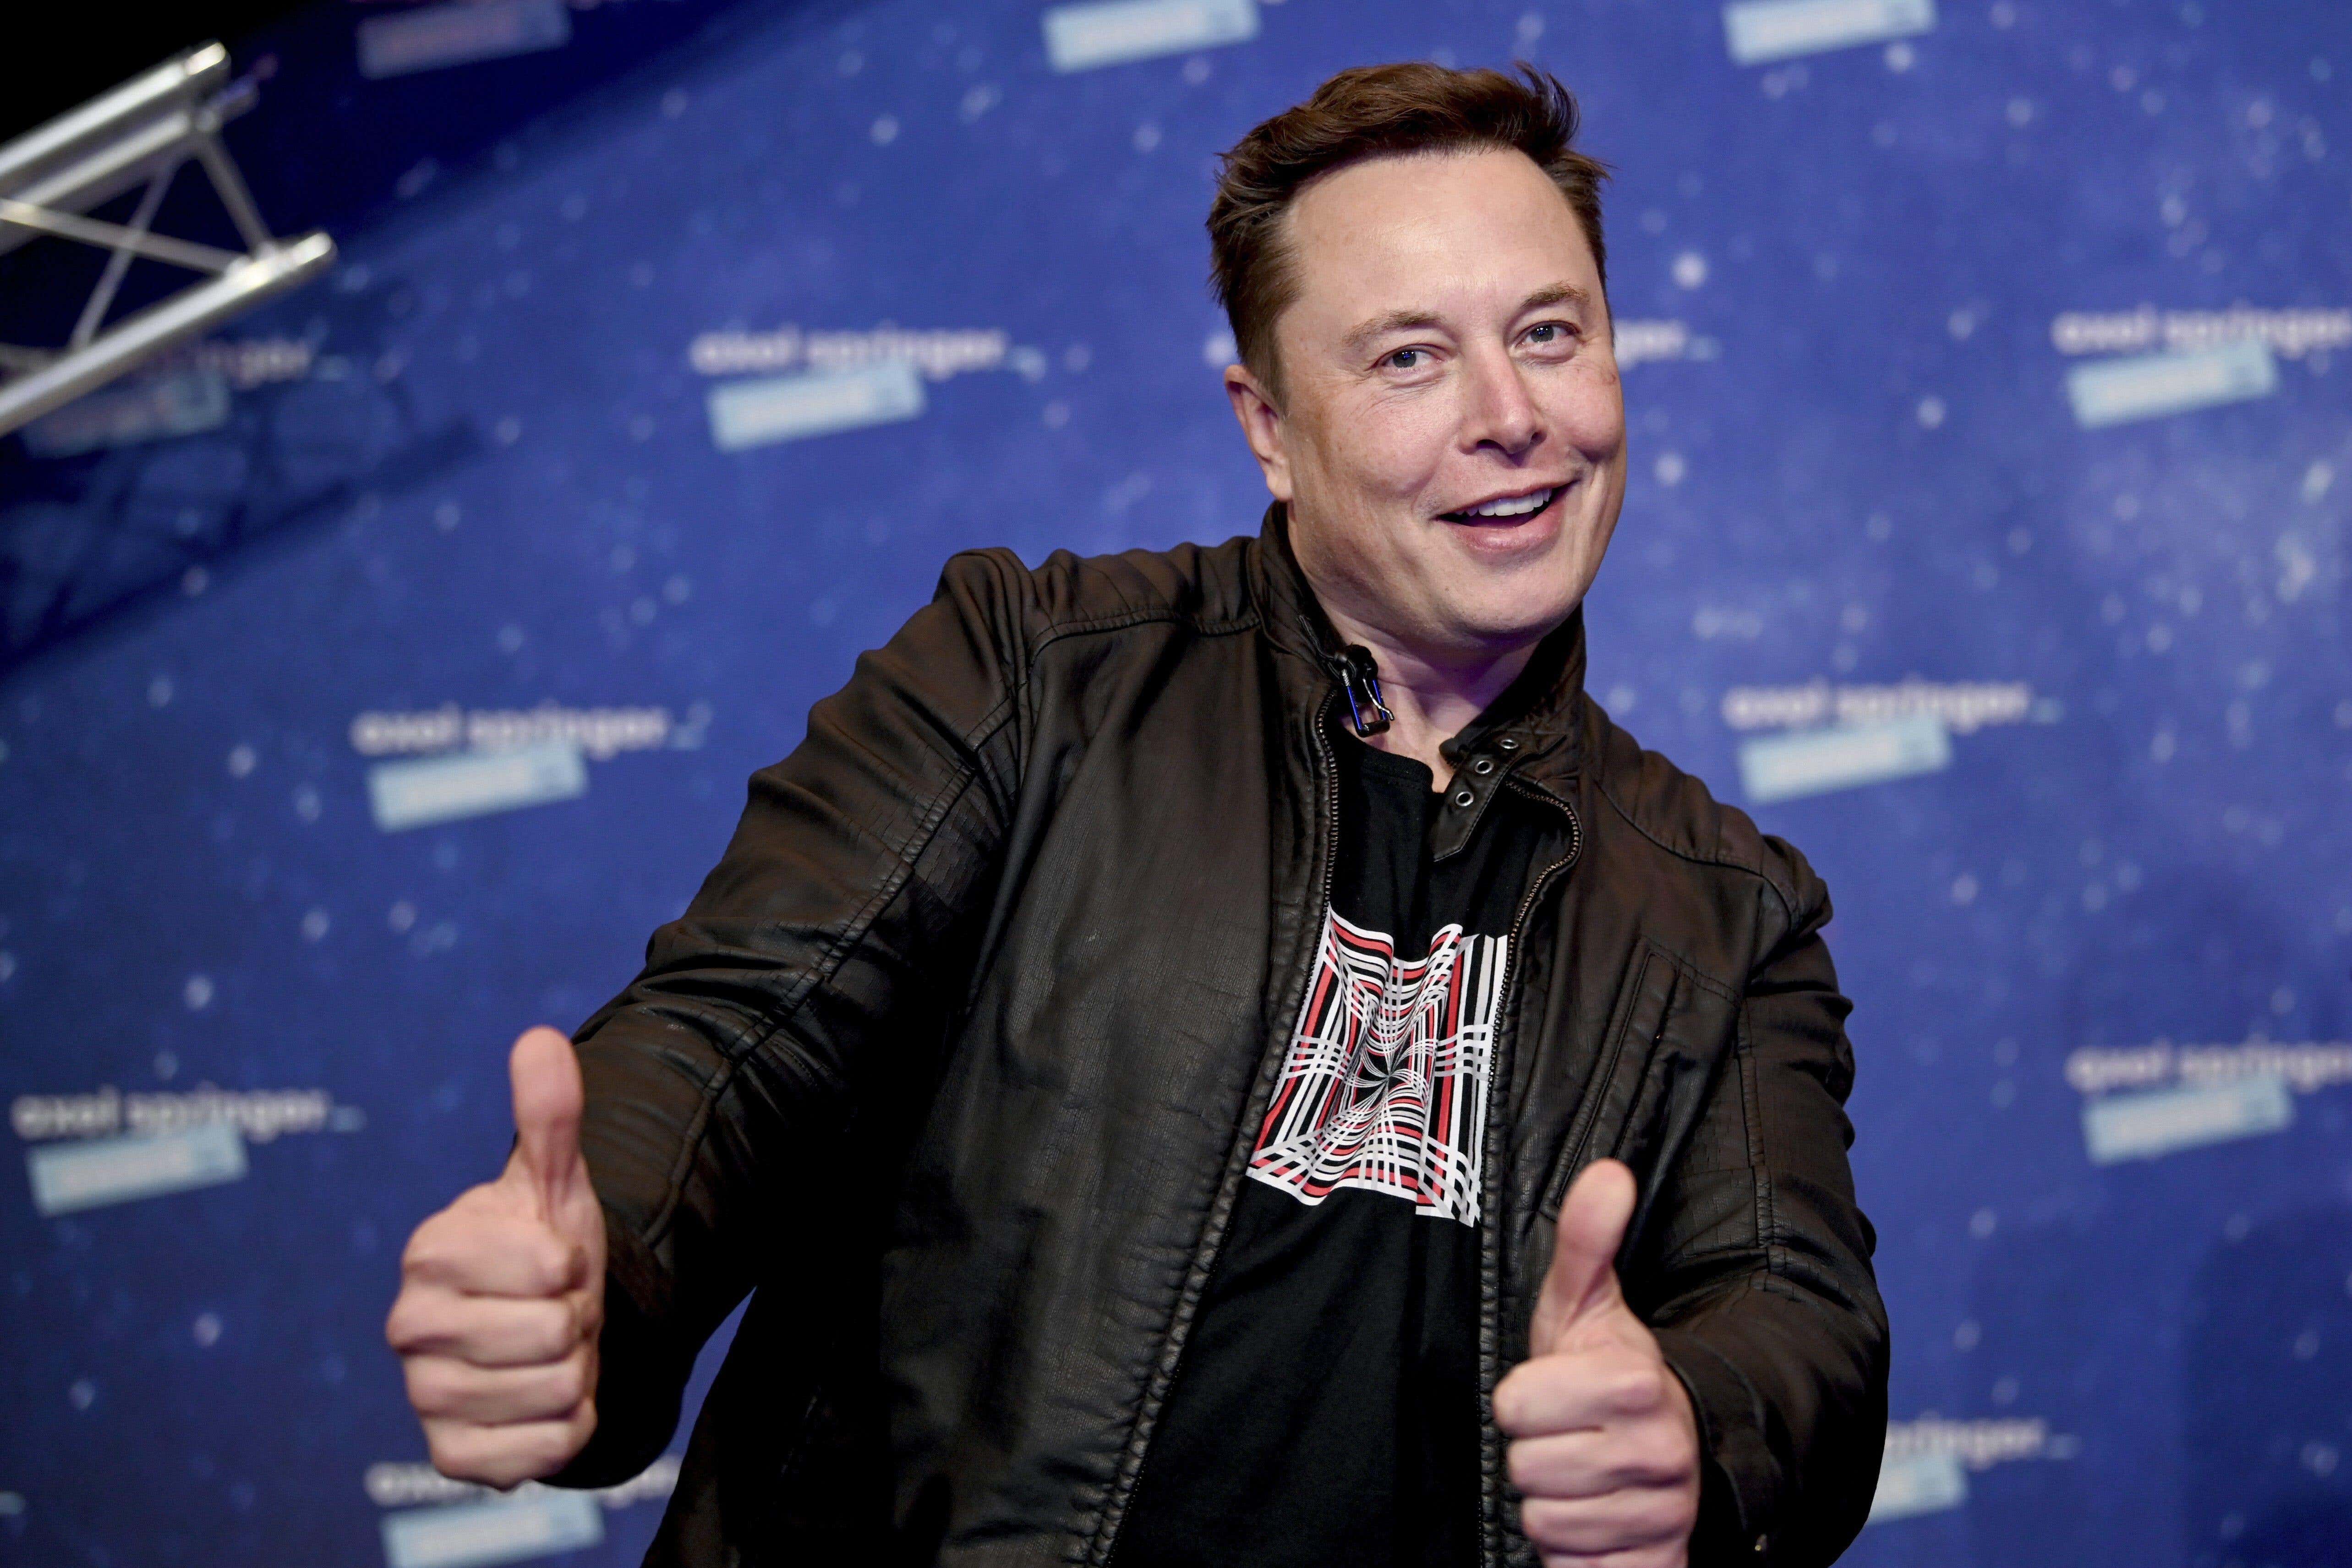 Musk would have a significant reach advantage over his opponent